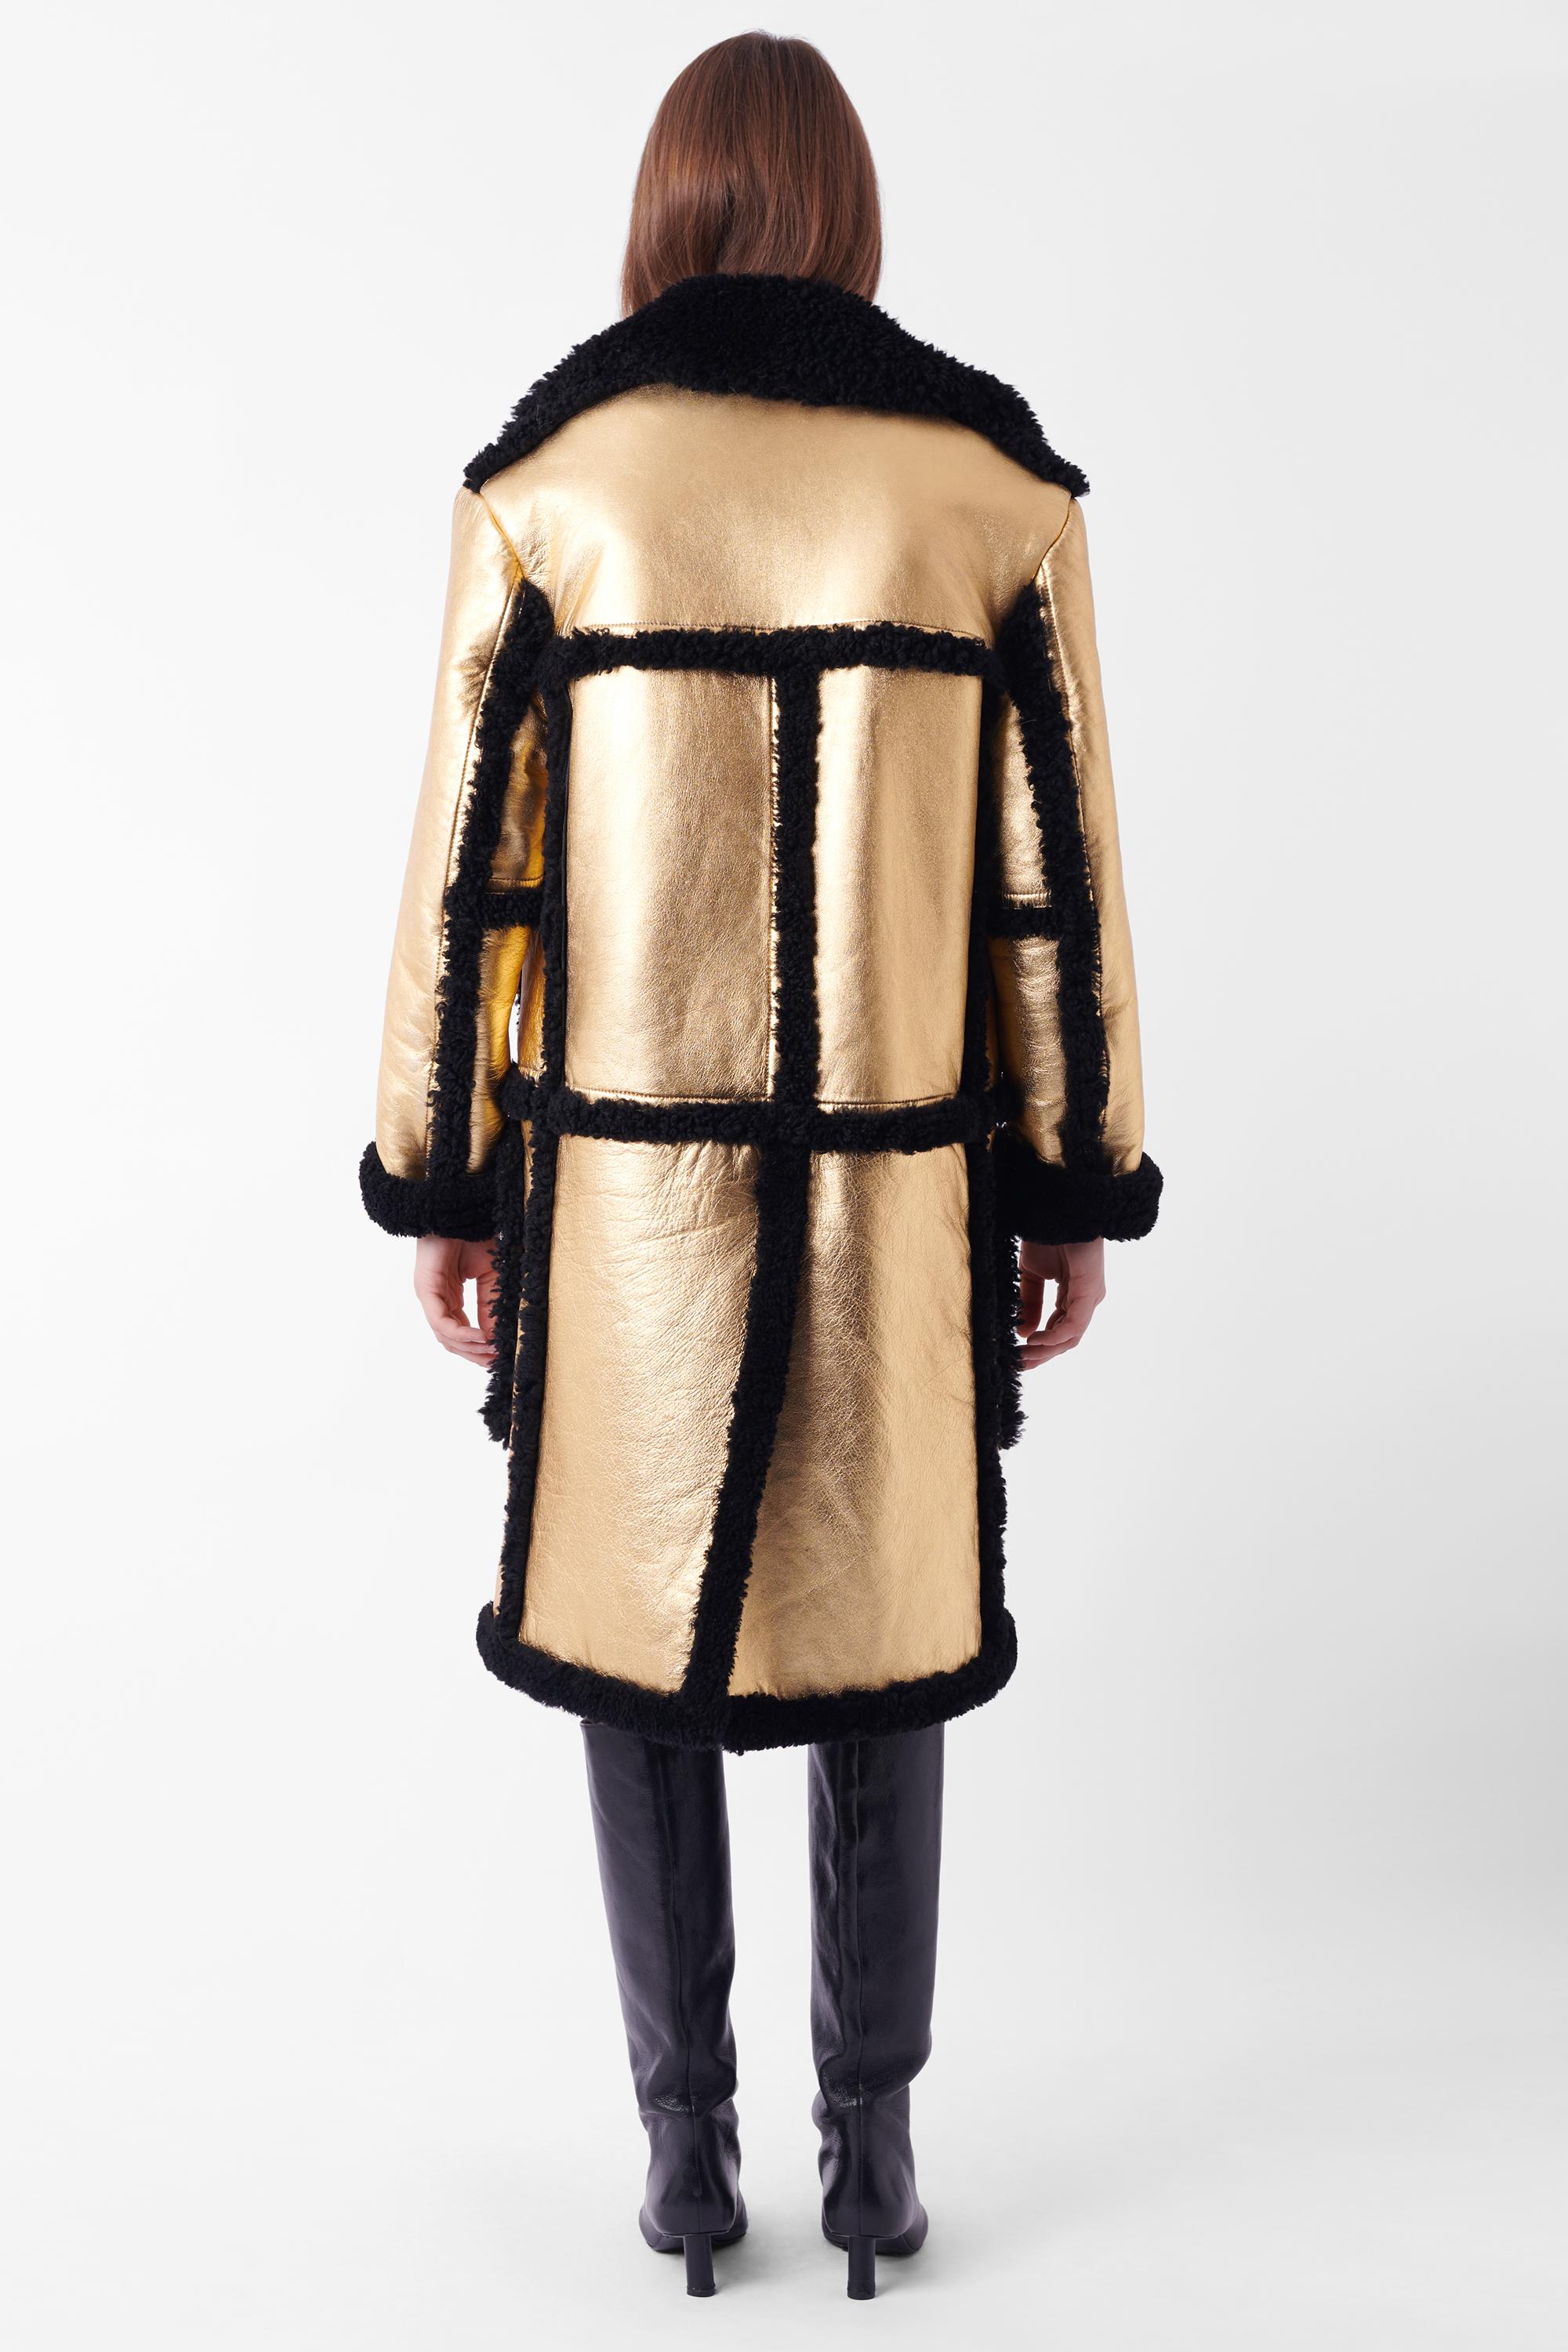 We are excited to present this beautiful Prada Fall Winter 2014 gold shearling coat. Features gold outer with inner black shearling lining, shearling accents, two deep front pockets and silver button closure. In excellent condition - brand new with